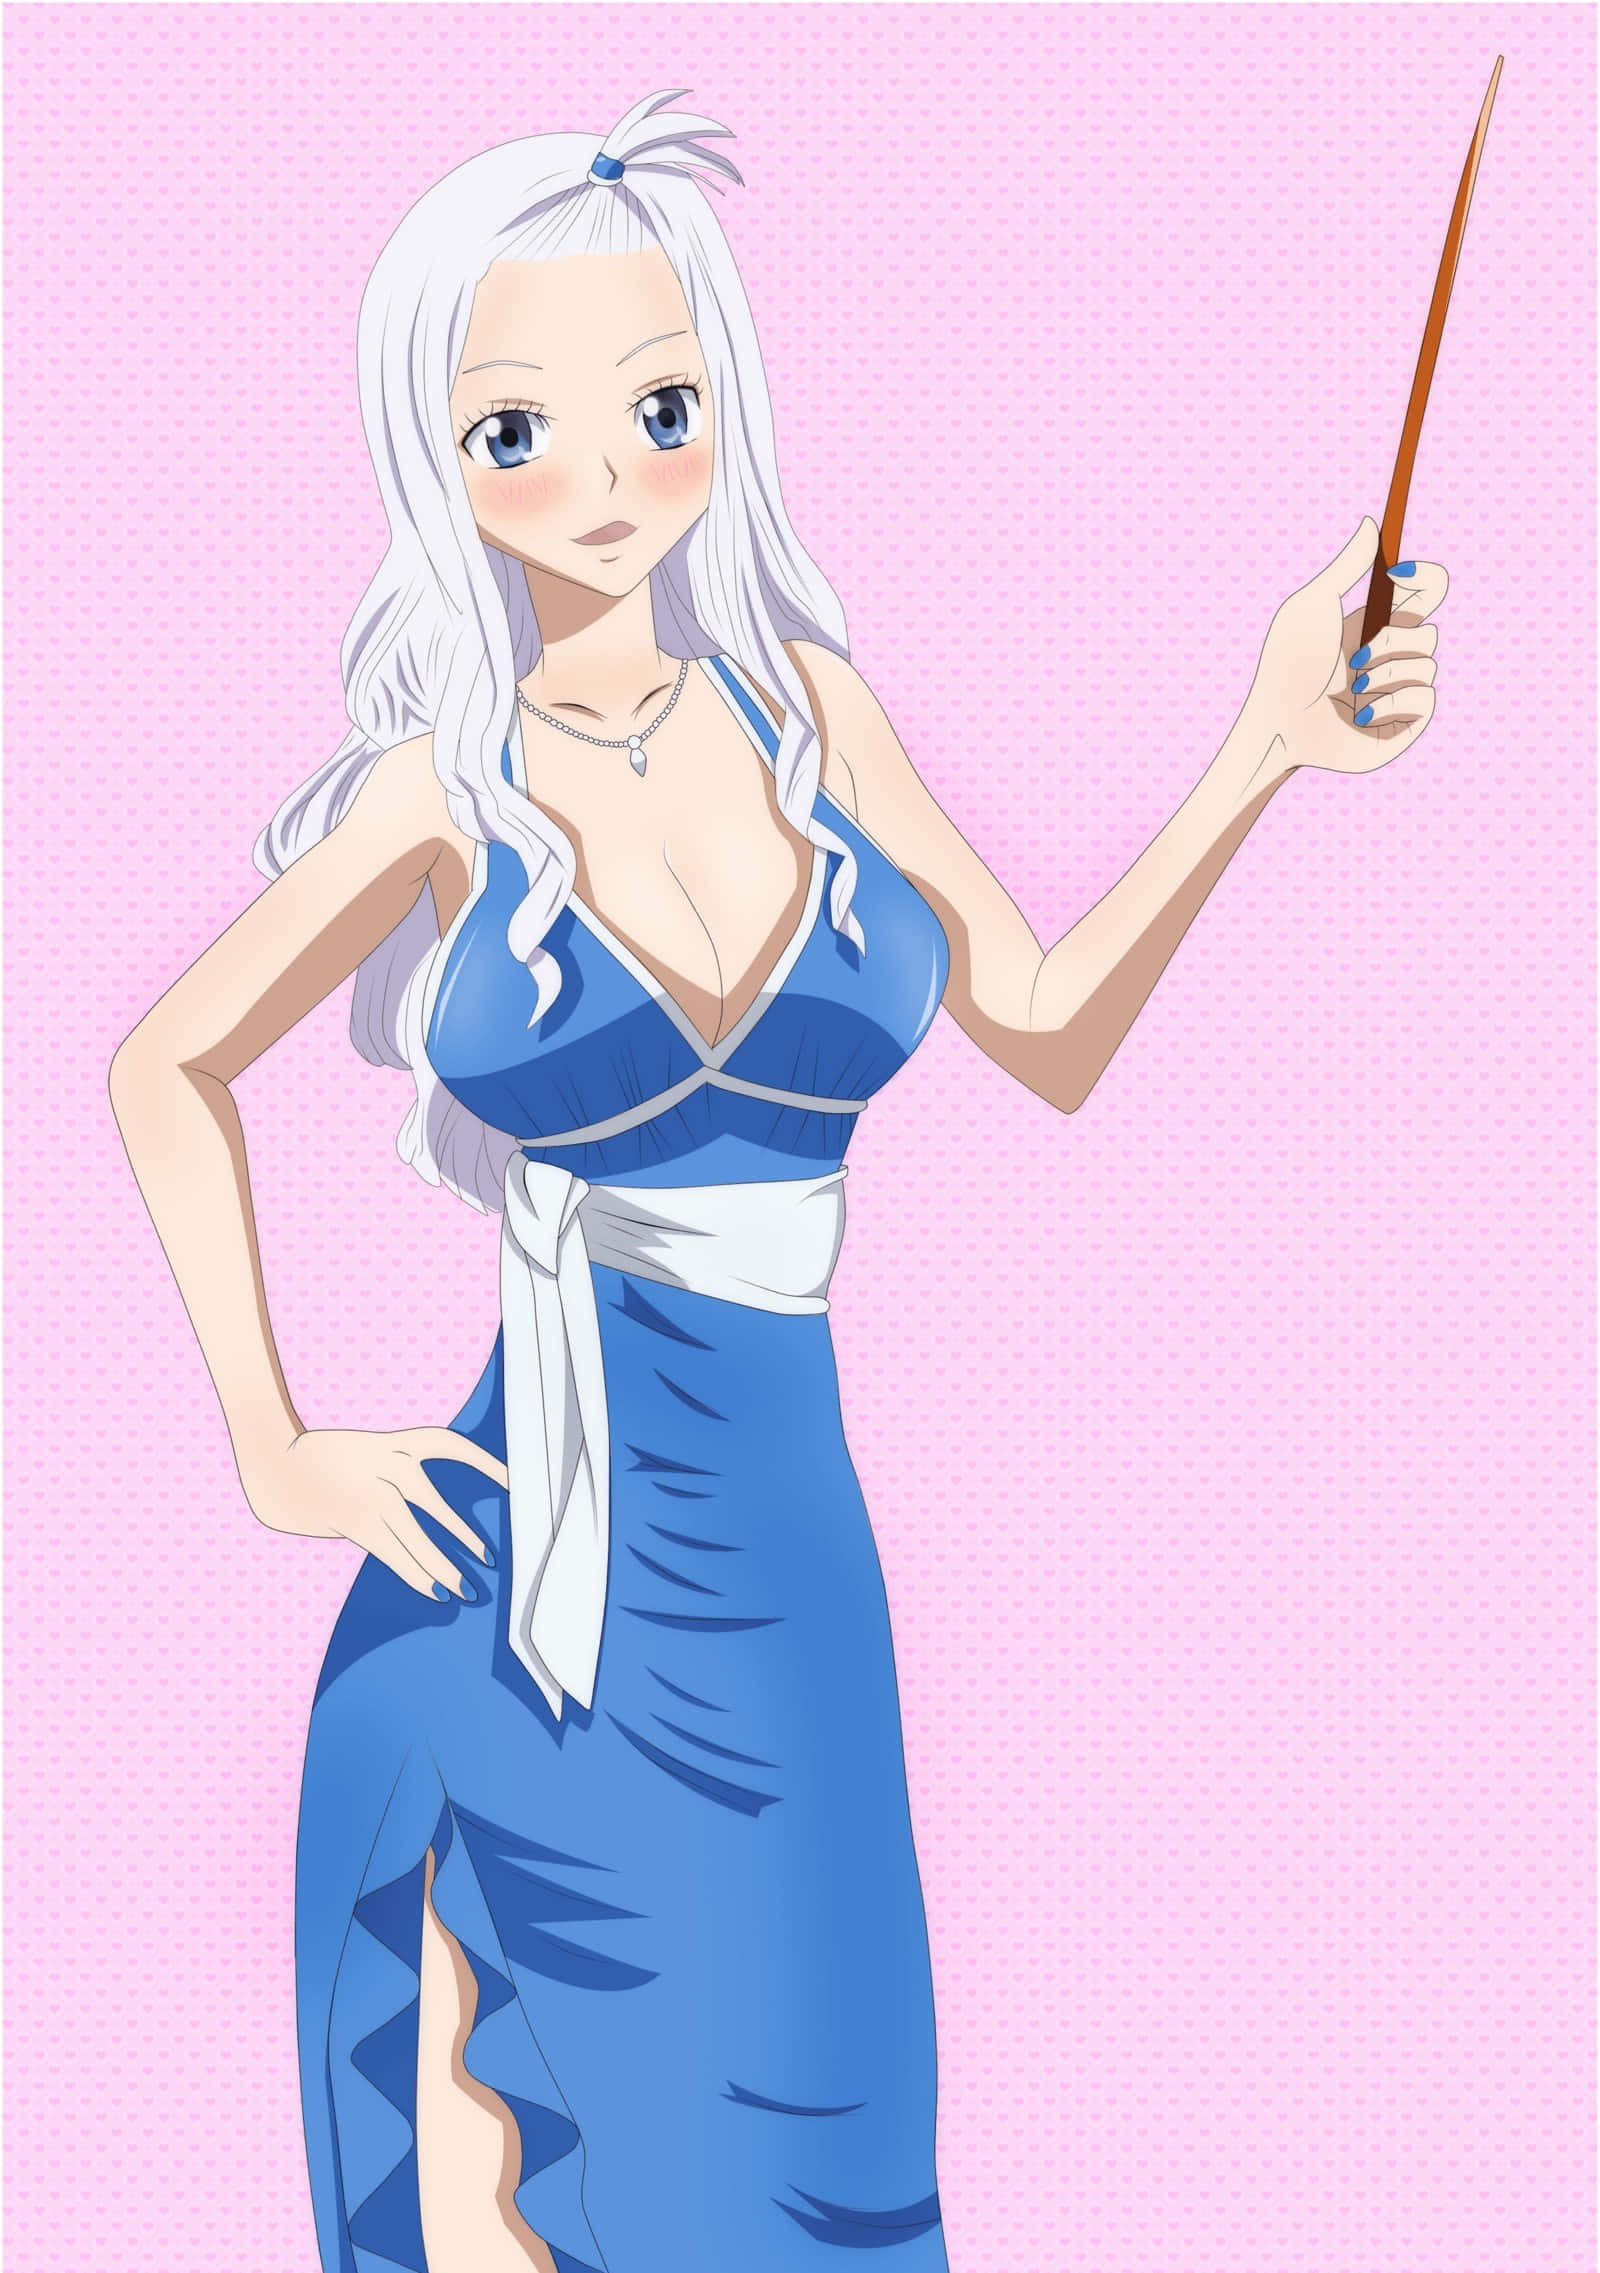 Mirajane Strauss casting a spell in a powerful pose Wallpaper